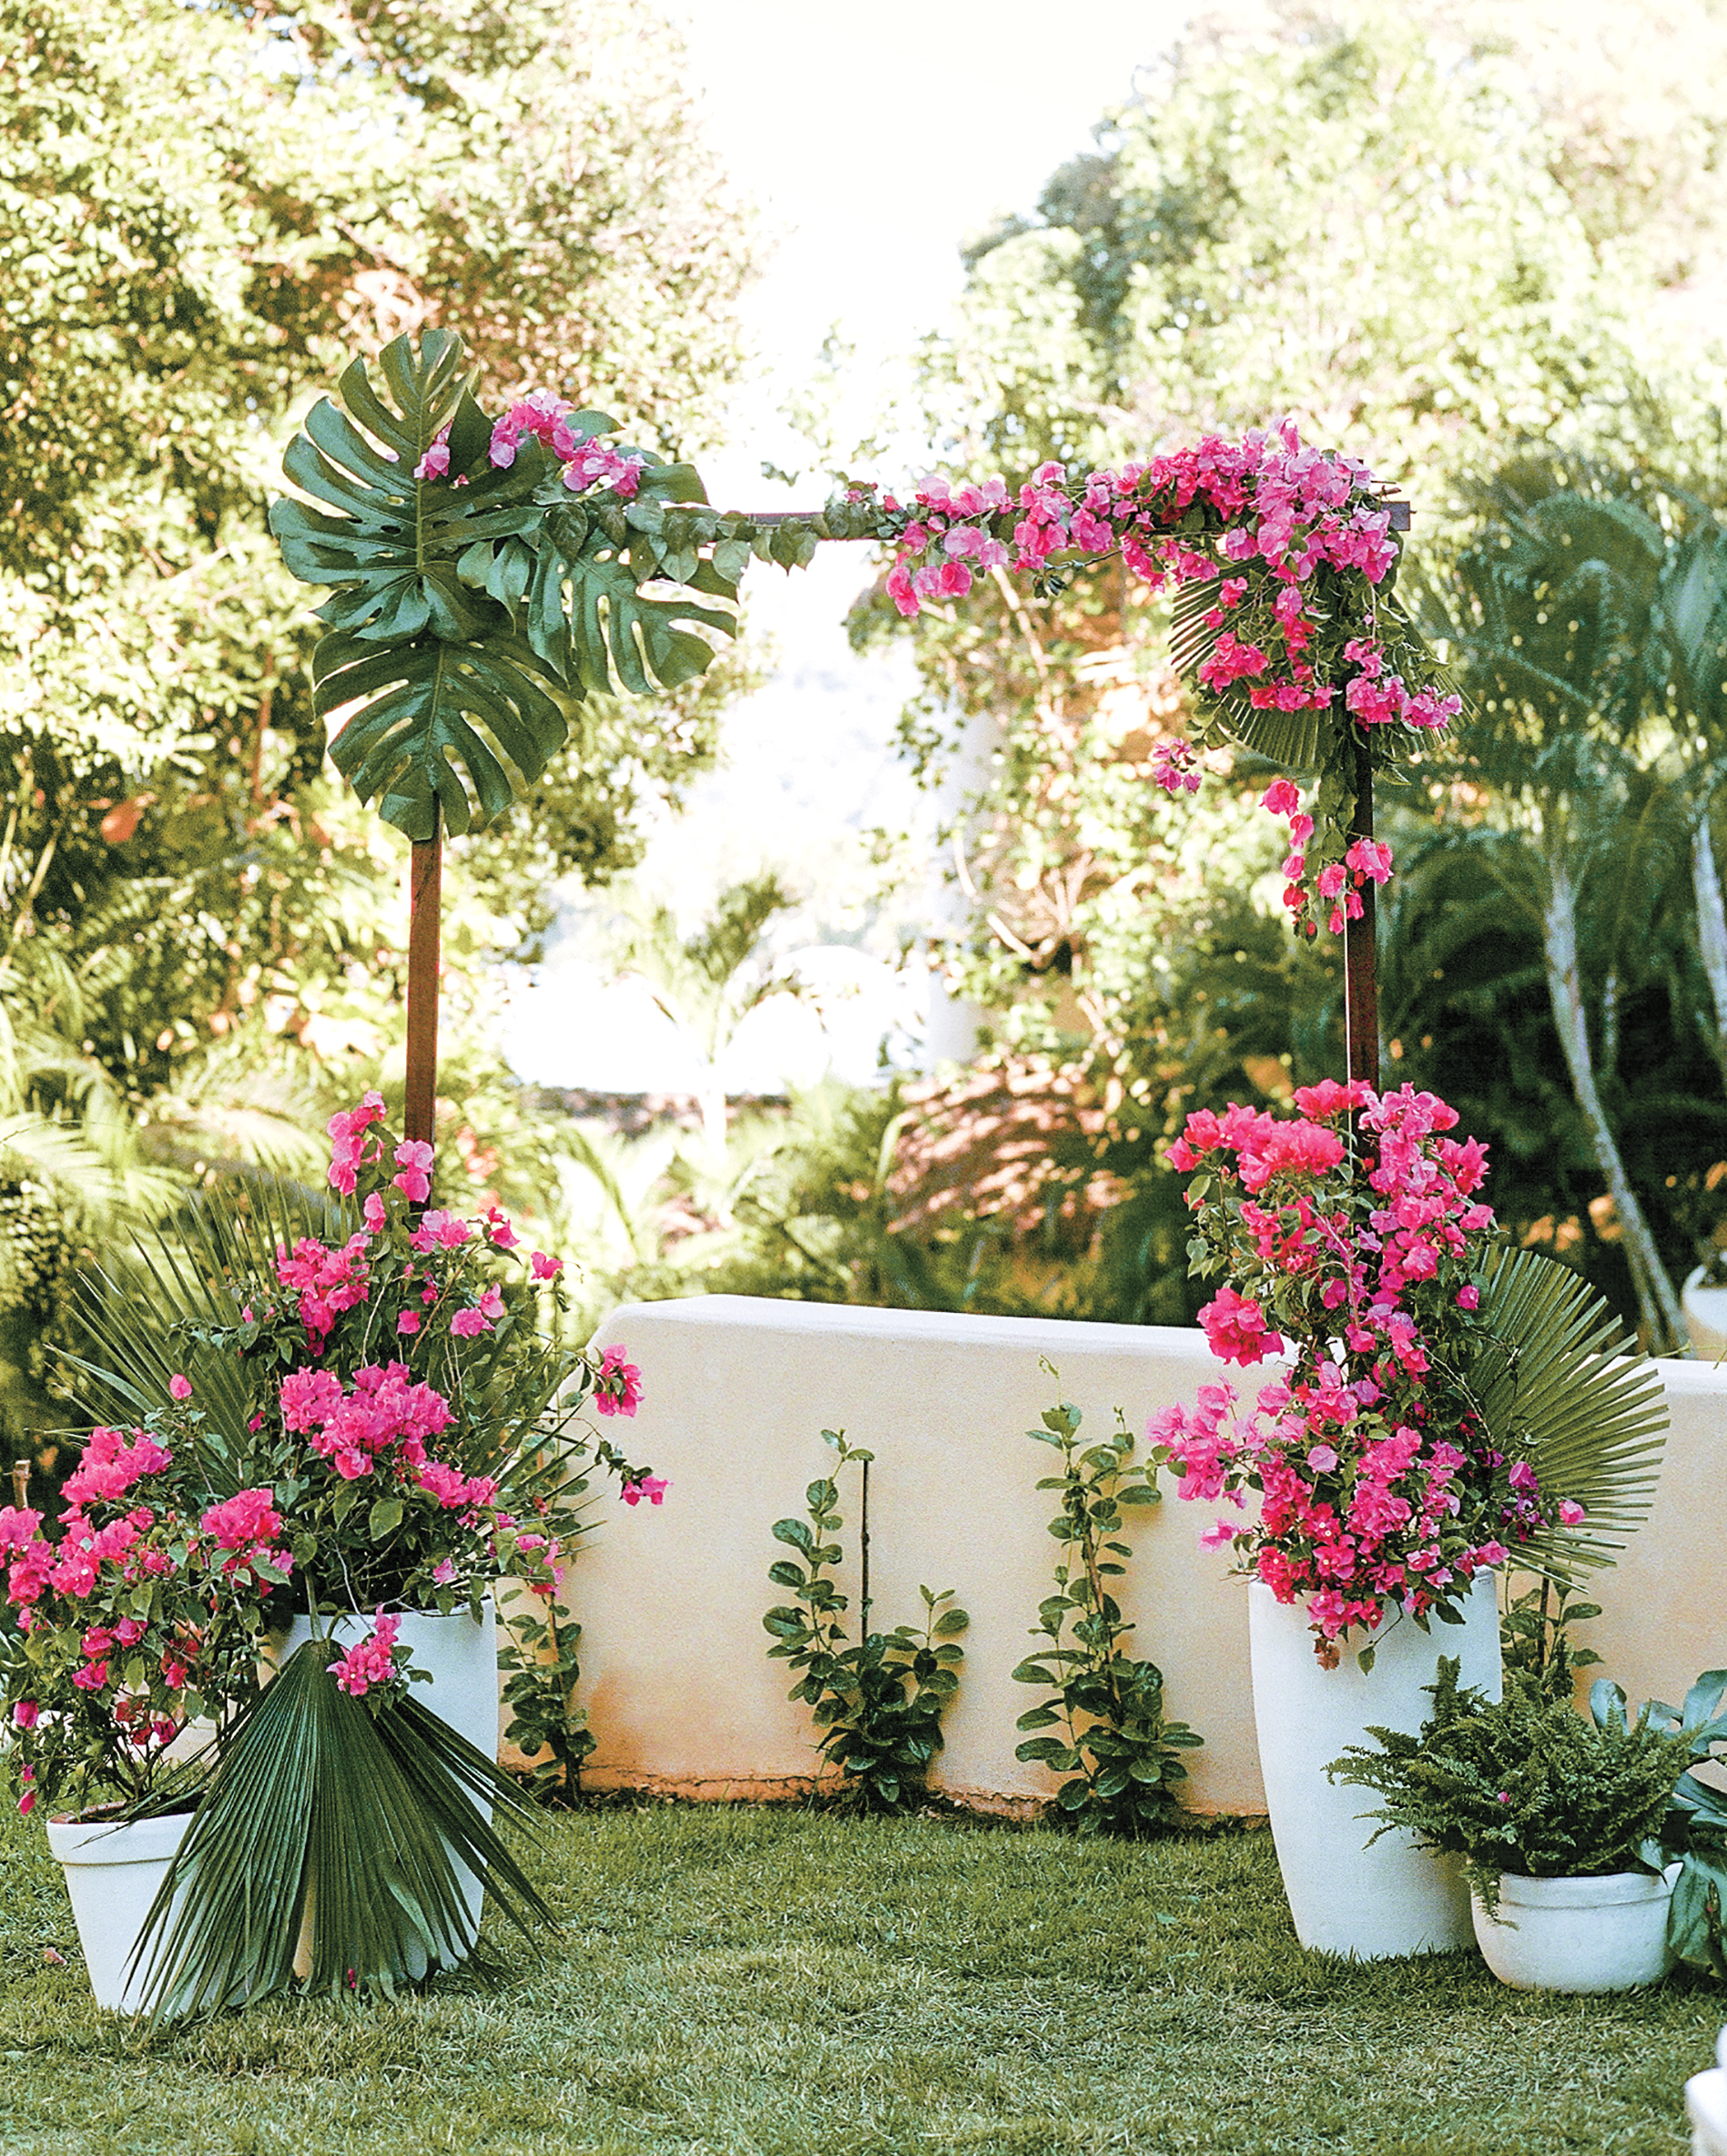 59 wedding arches that will instantly upgrade your ceremony | martha